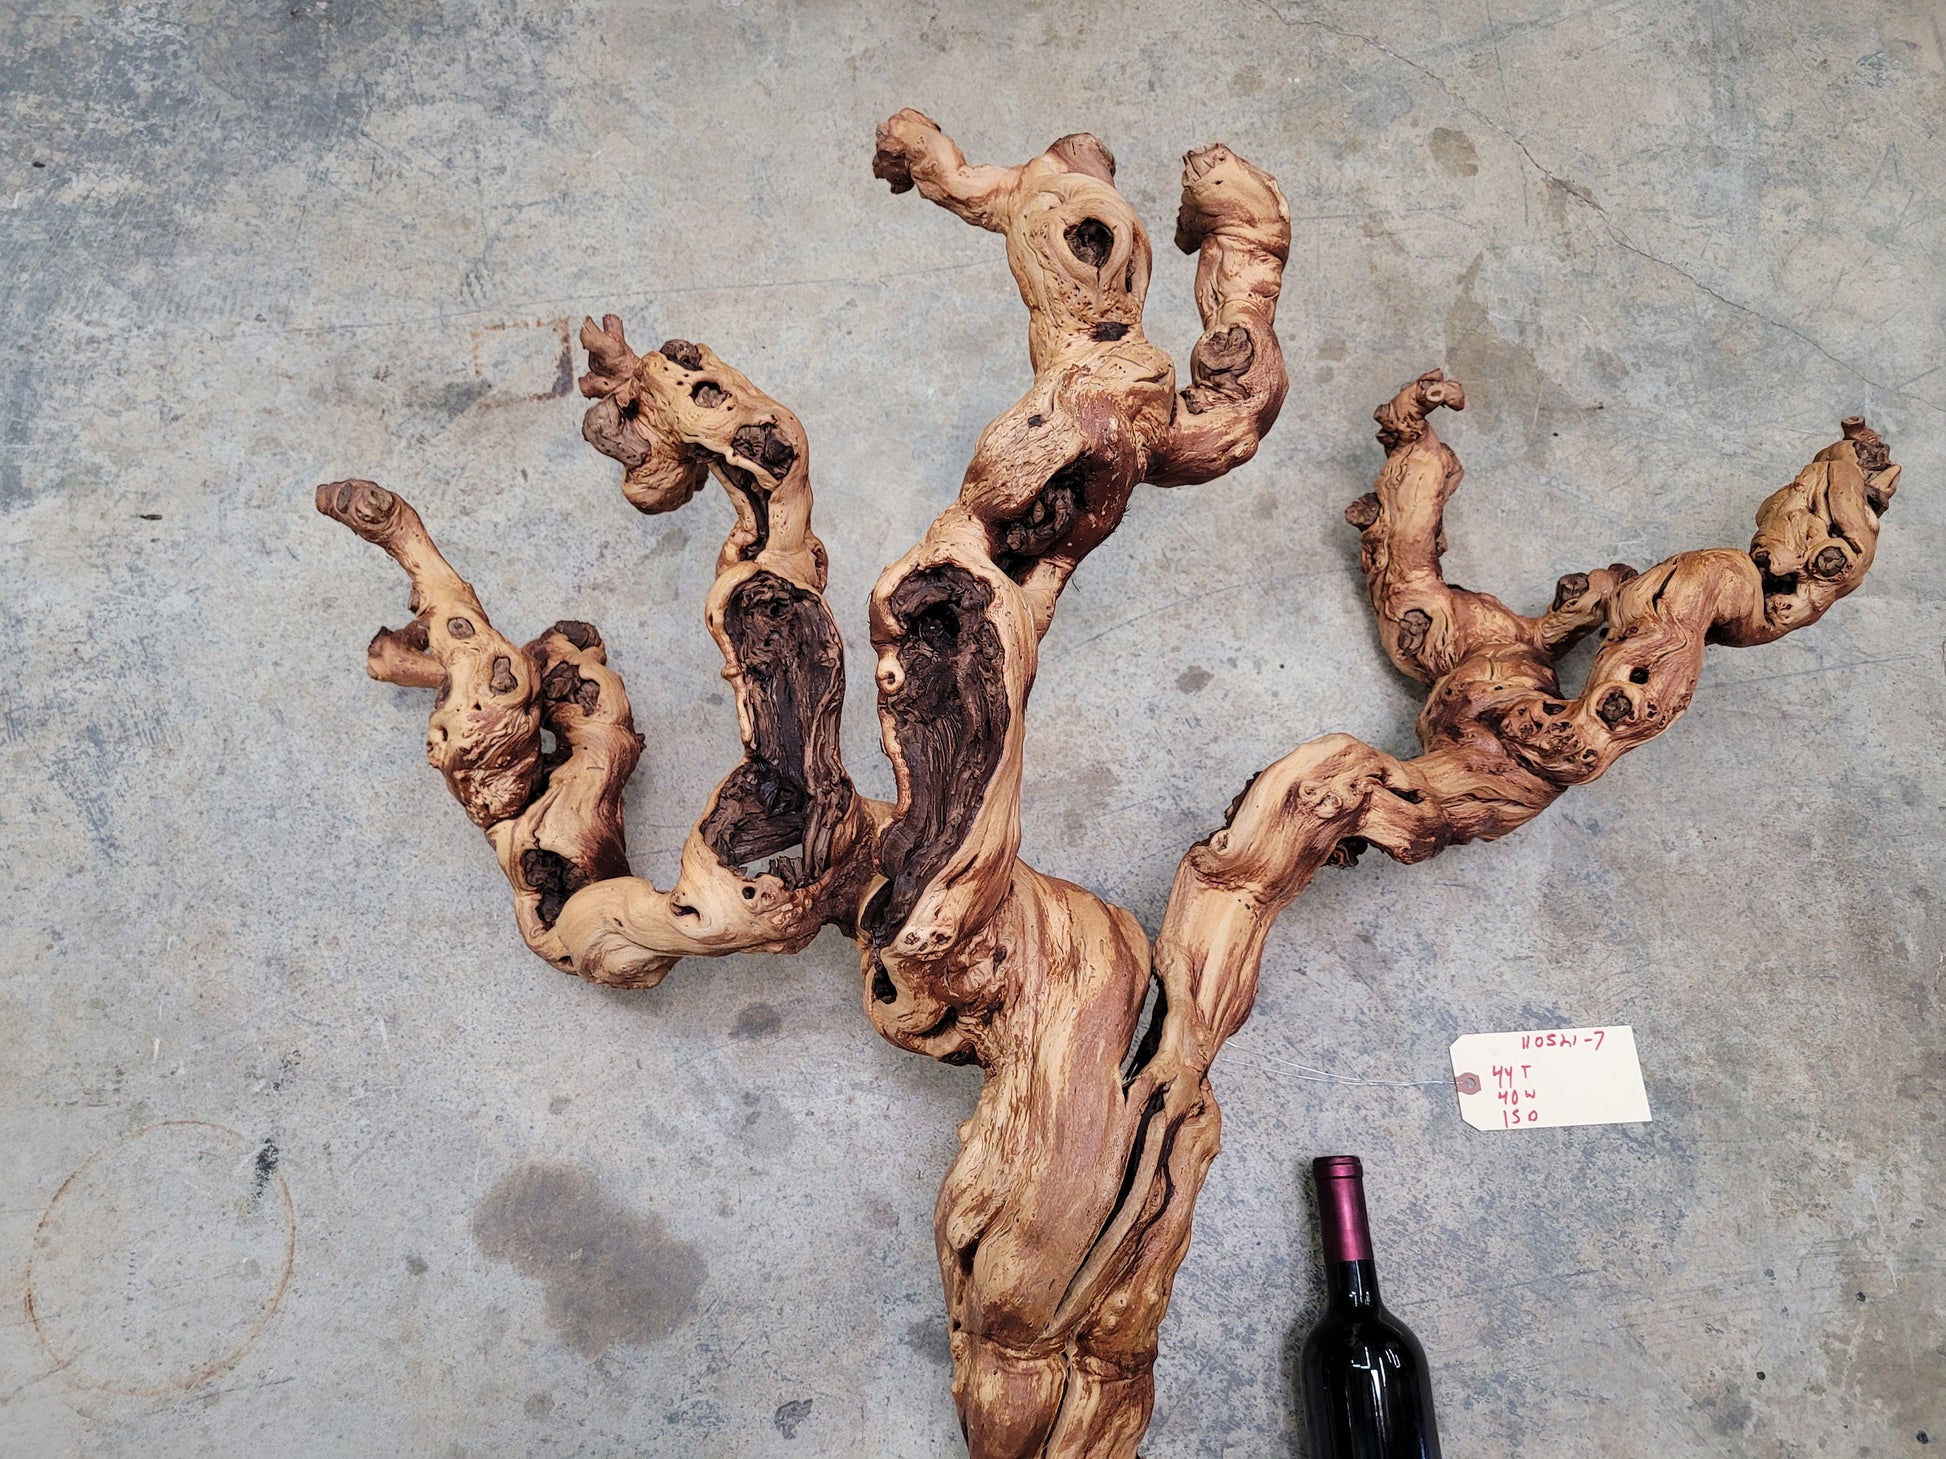 Grape Vine Zinfandel Art From Turley Winery 100% Reclaimed + Ready to Ship!! 110521-7